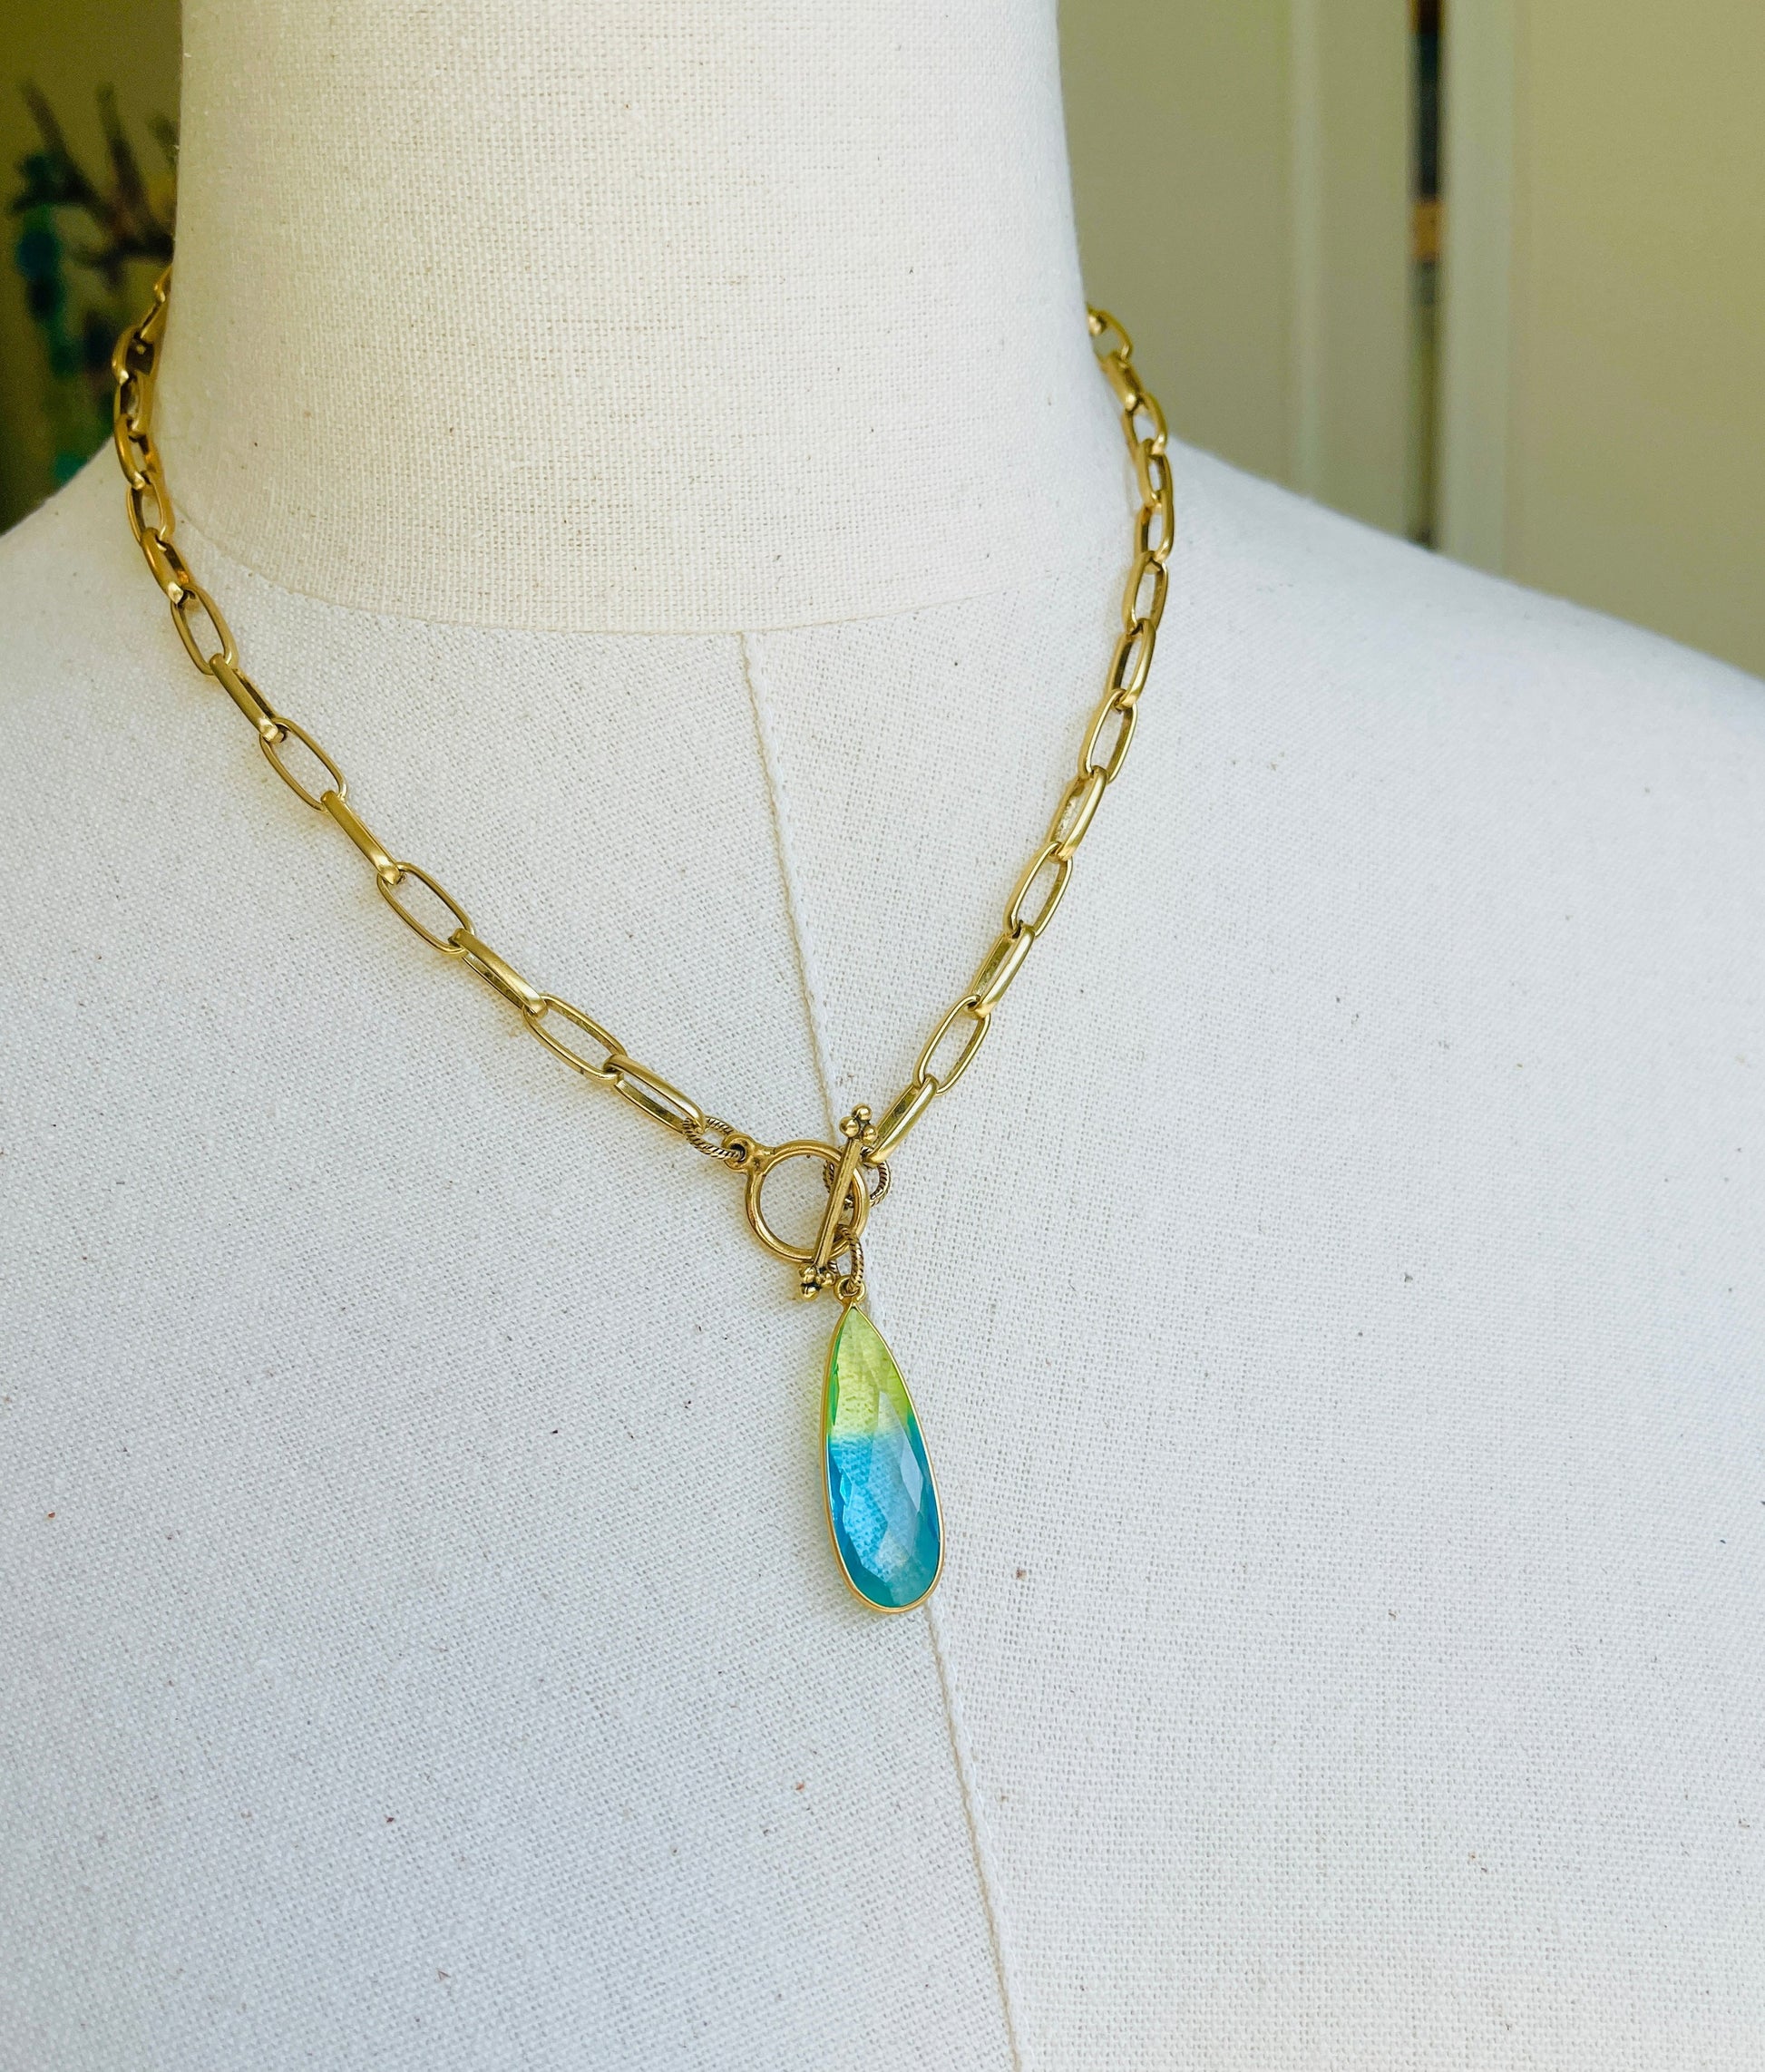 Ocean Quartz Necklace Handmade in the USA on mannequin display.